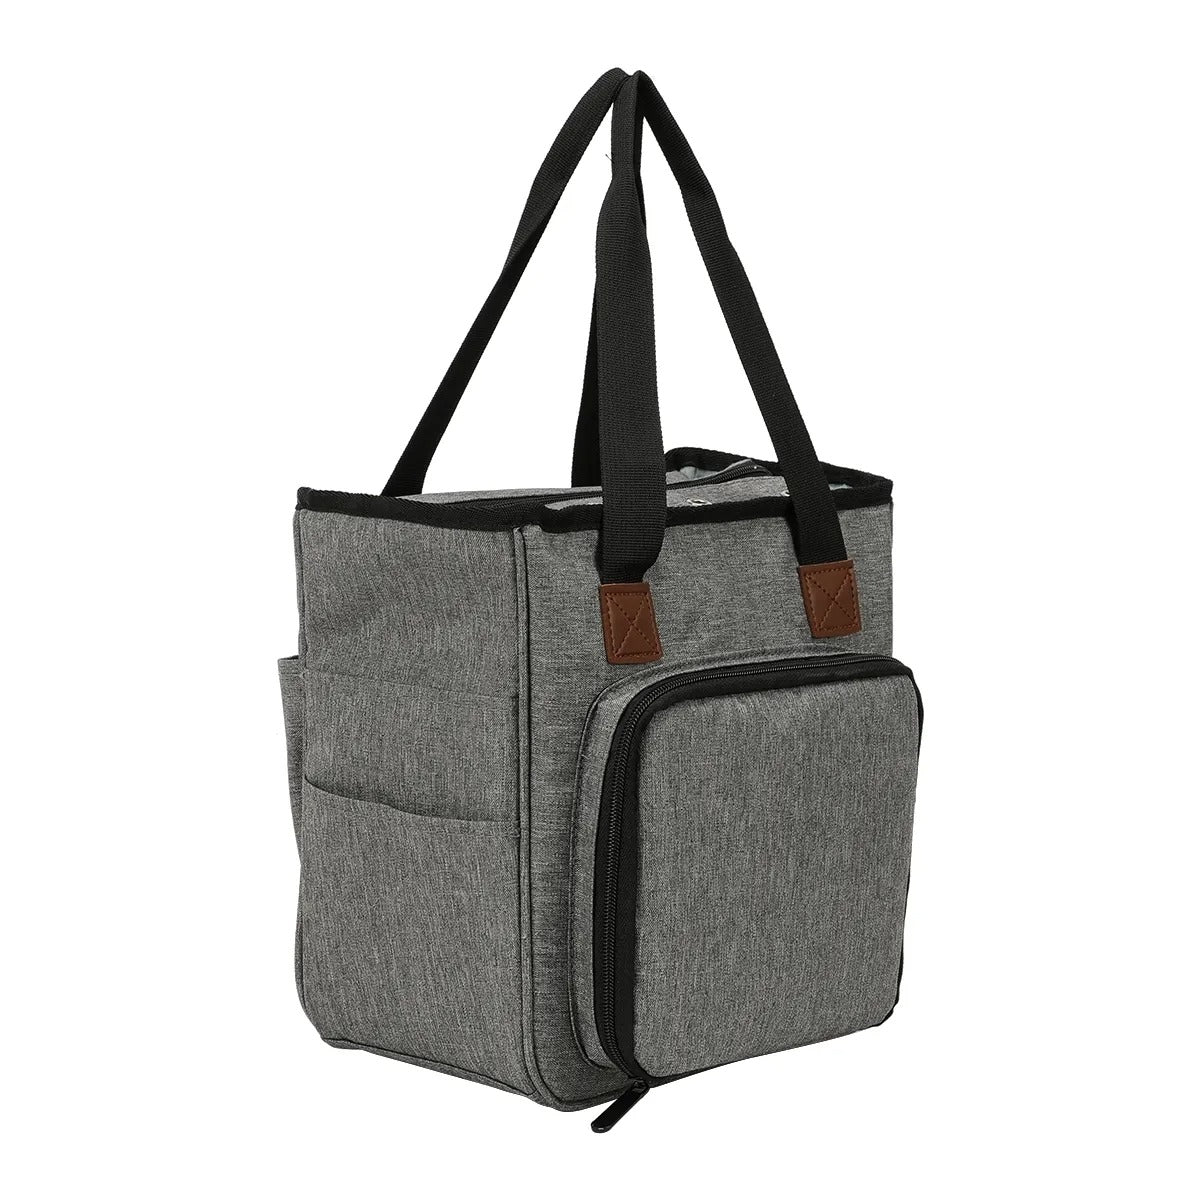 Yarn Organizer Tote with a front pocket and black handles.